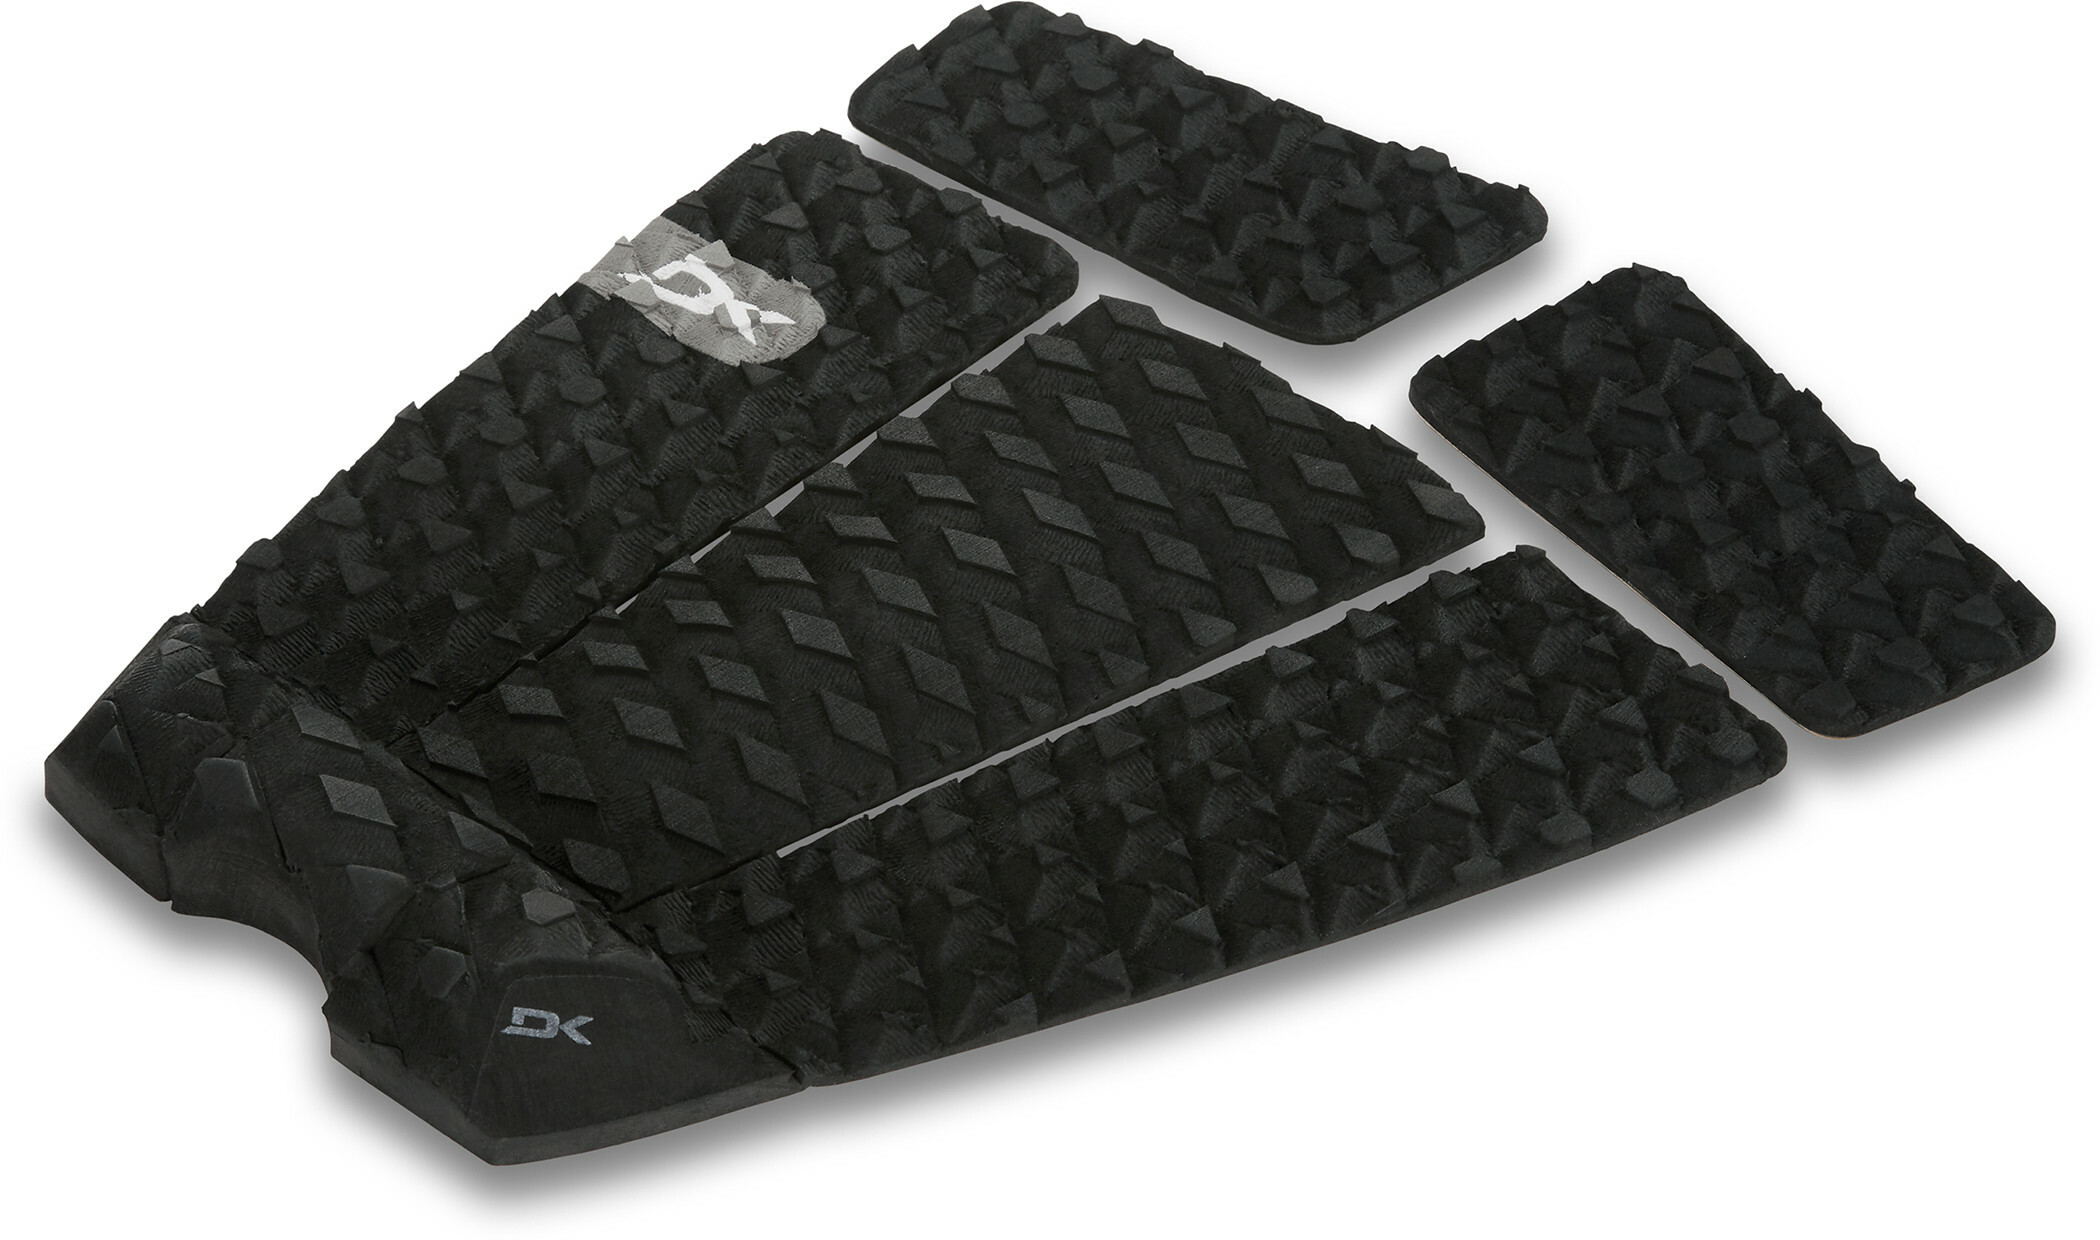 BRUCE IRONS PRO SURF TRACTION PAD